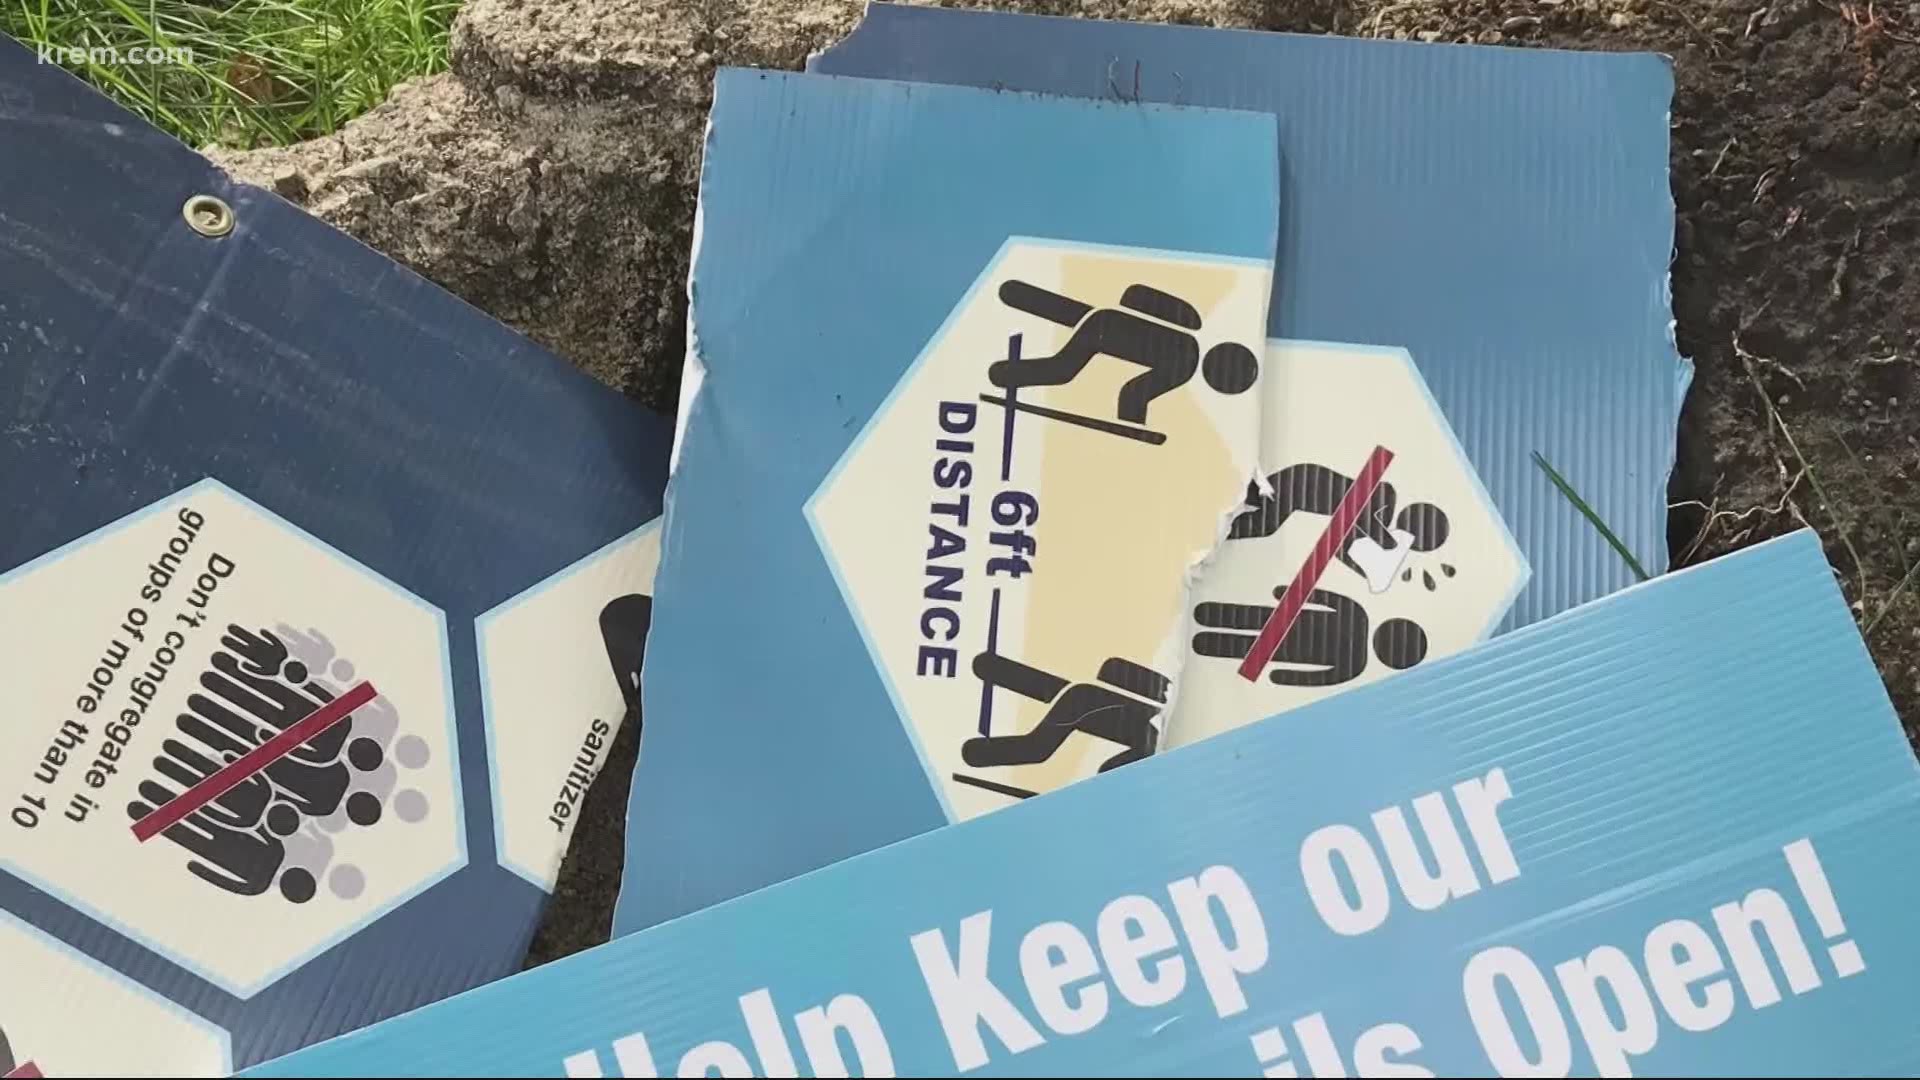 A North Idaho man will have to pay back the city of Sandpoint after he admitted to tearing down signs at a public park.